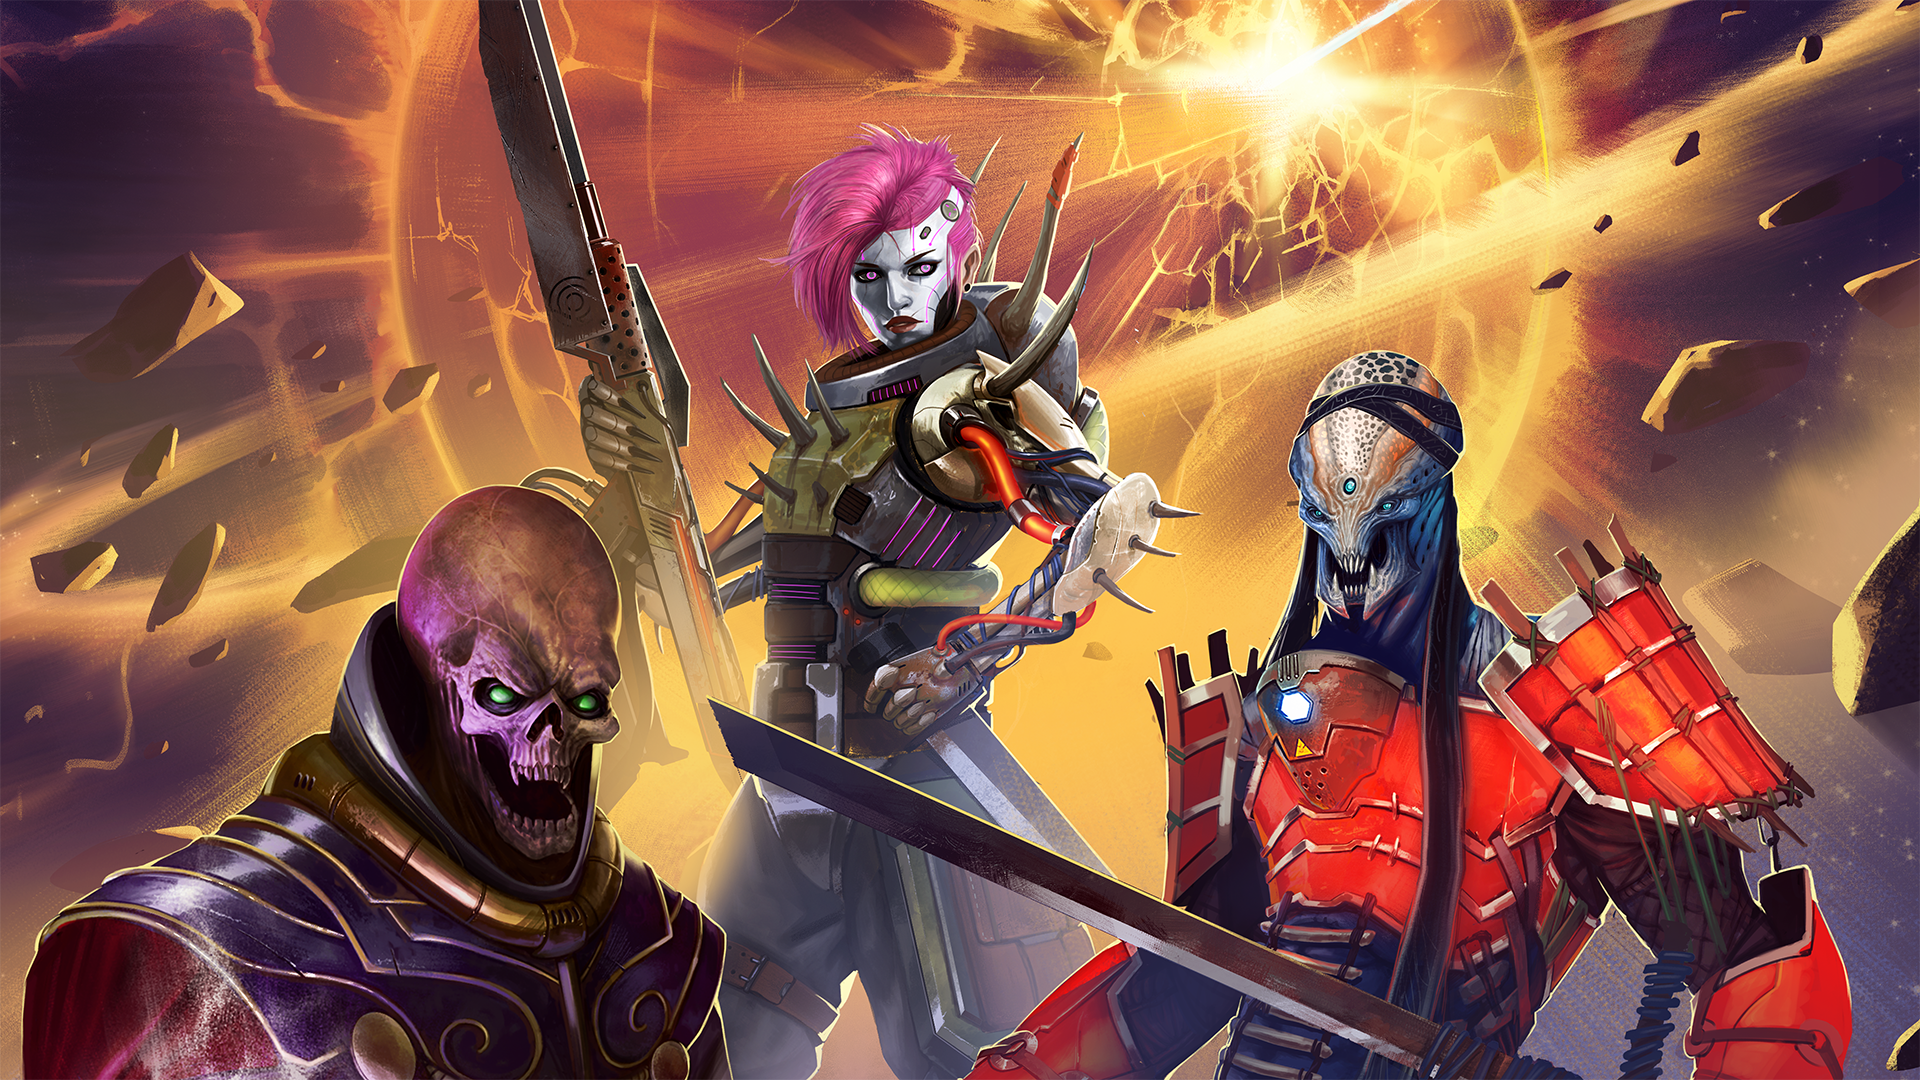 Three beings stand in the foreground with a planet exploding in the background. On the left if a humanoid with skull-like features, glowing green eyes, and a dark blue and gold armor, in the middle is a pale humanoid with spiked armor and bright pink hair, to the right is a humanoid in red armor with blue skin and mandibles protruding from their jaw